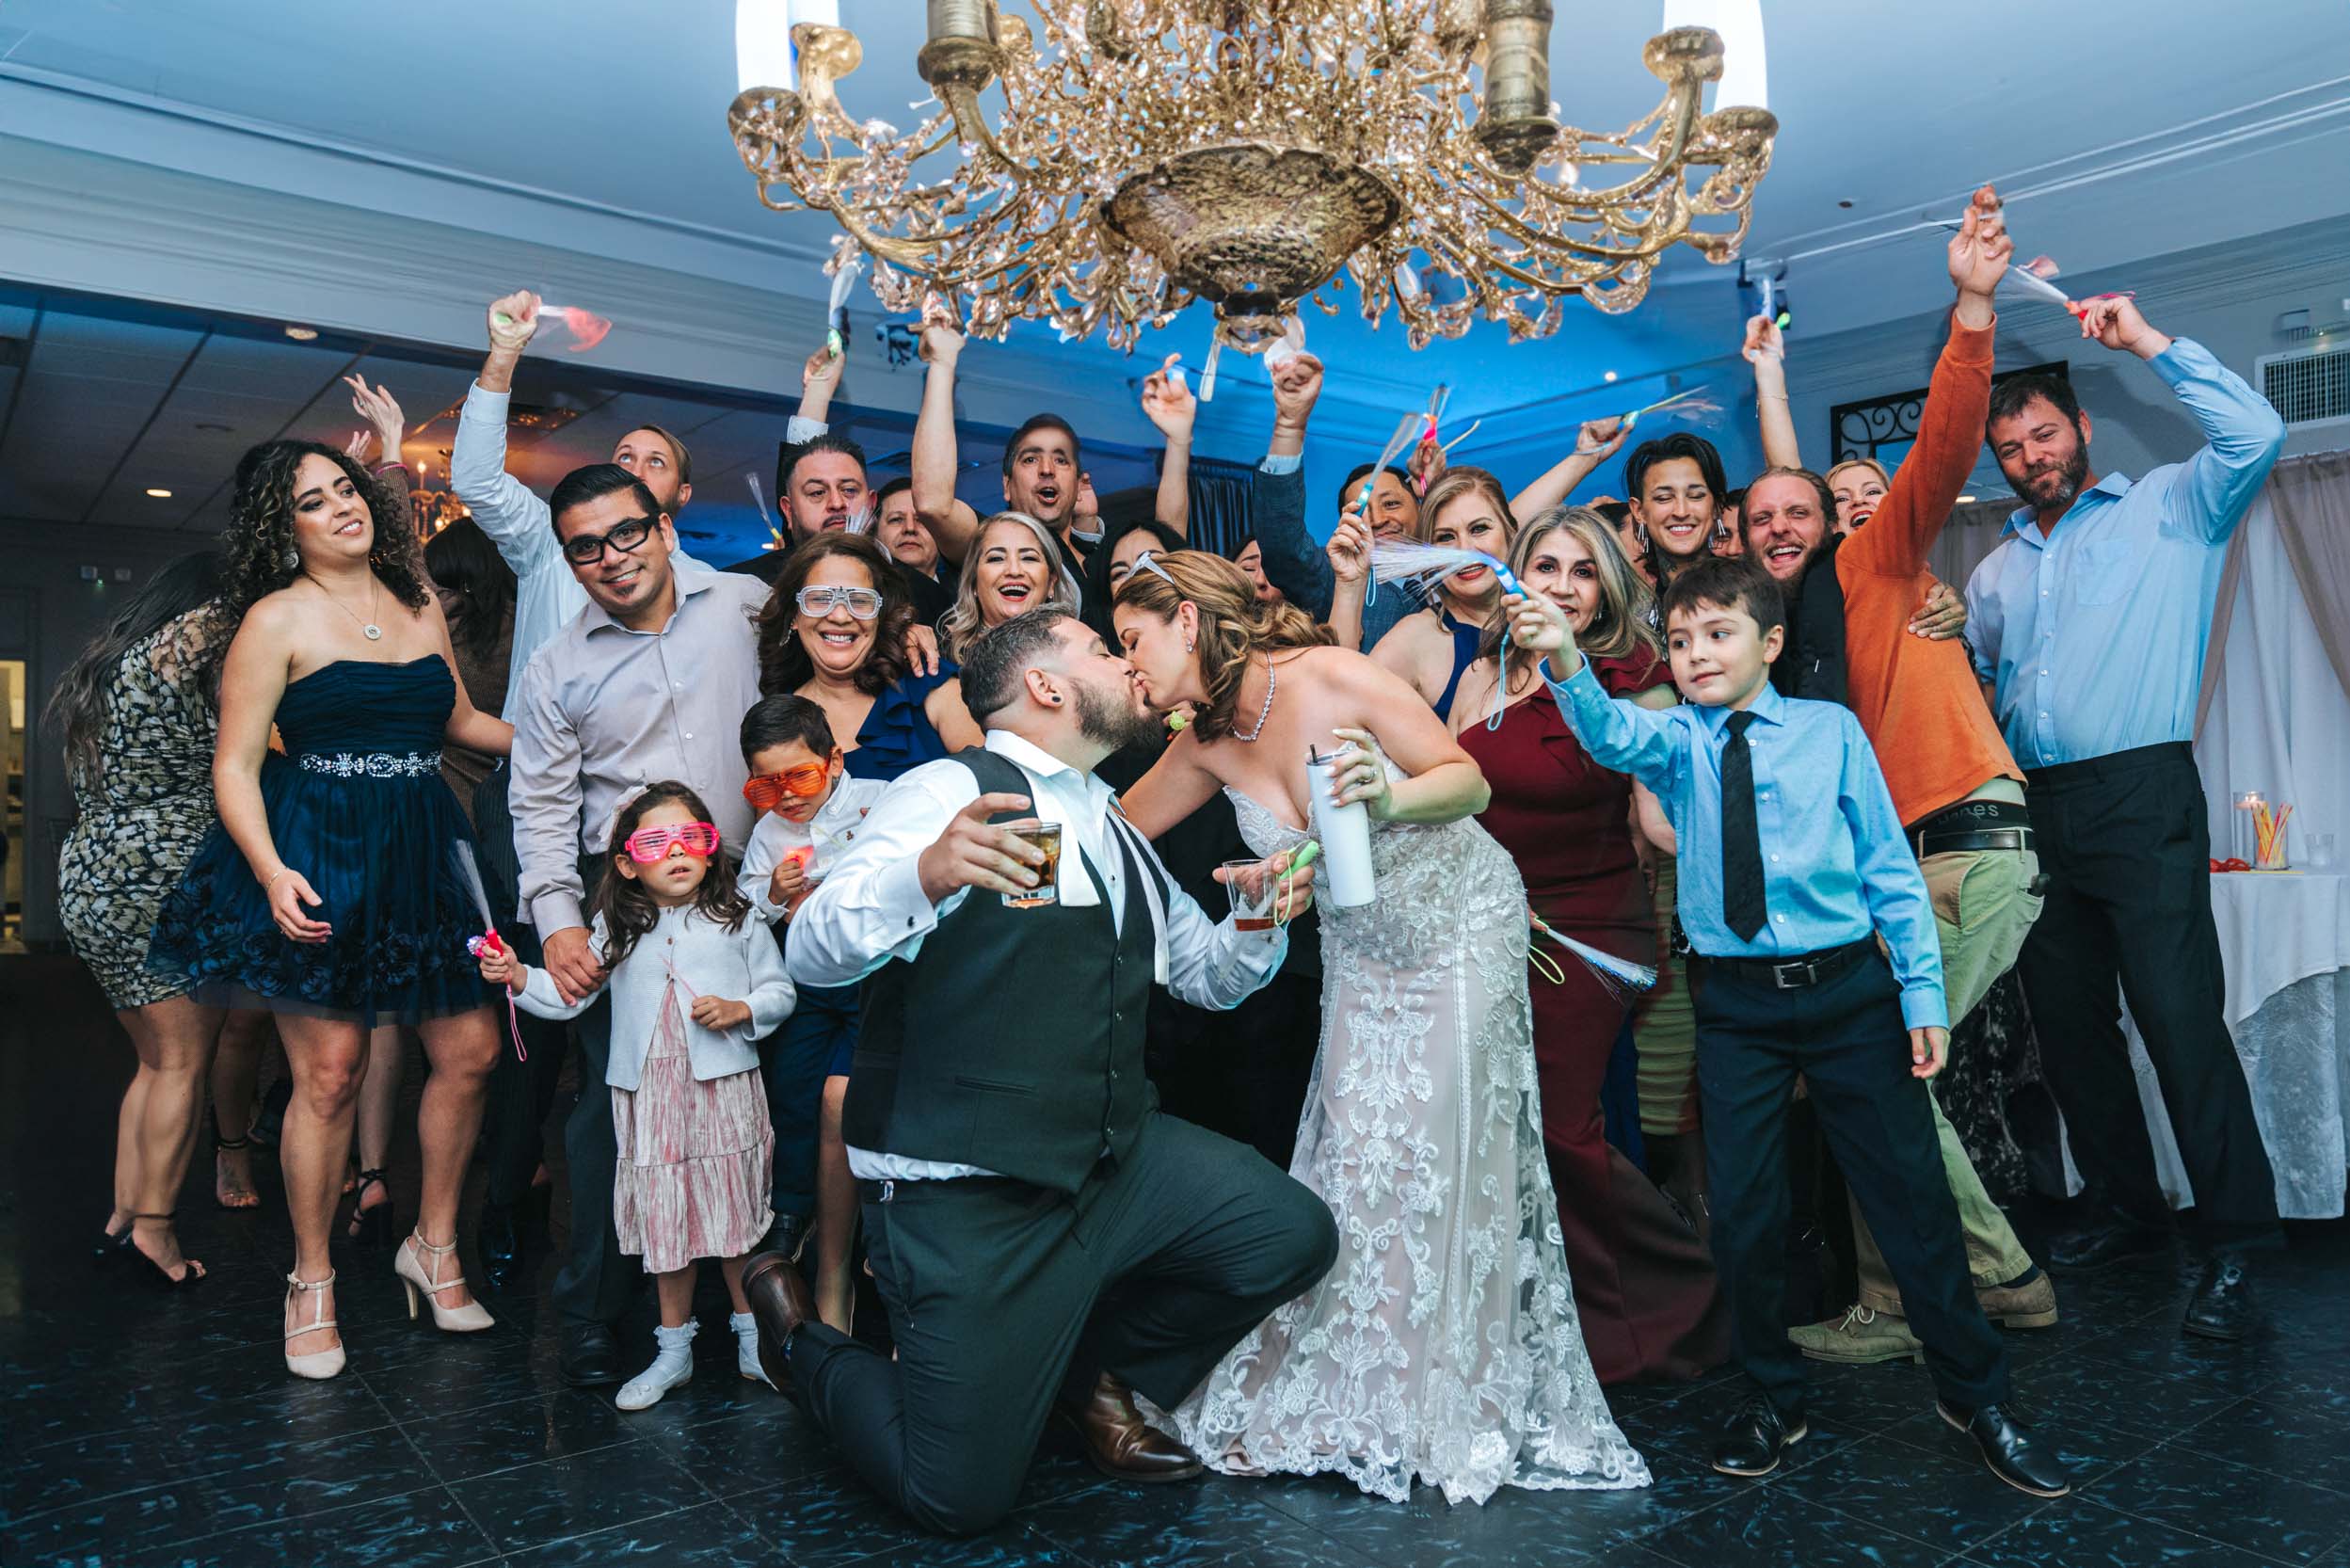 bride, groom and wedding guests celebrating during wedding reception in New Orleans